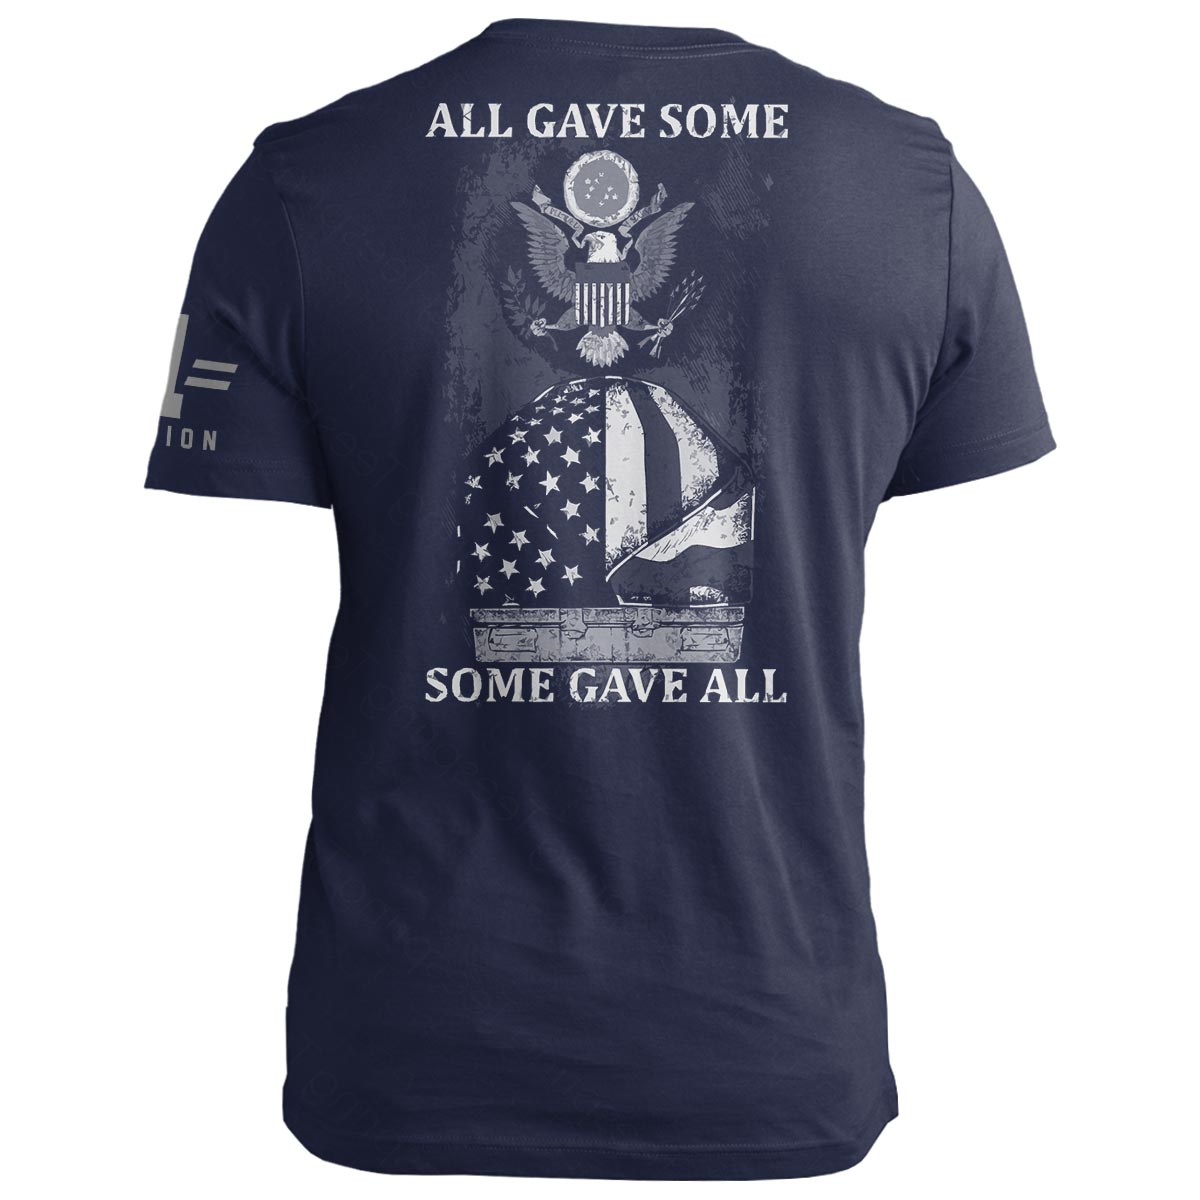 All Gave Some. Some Gave All